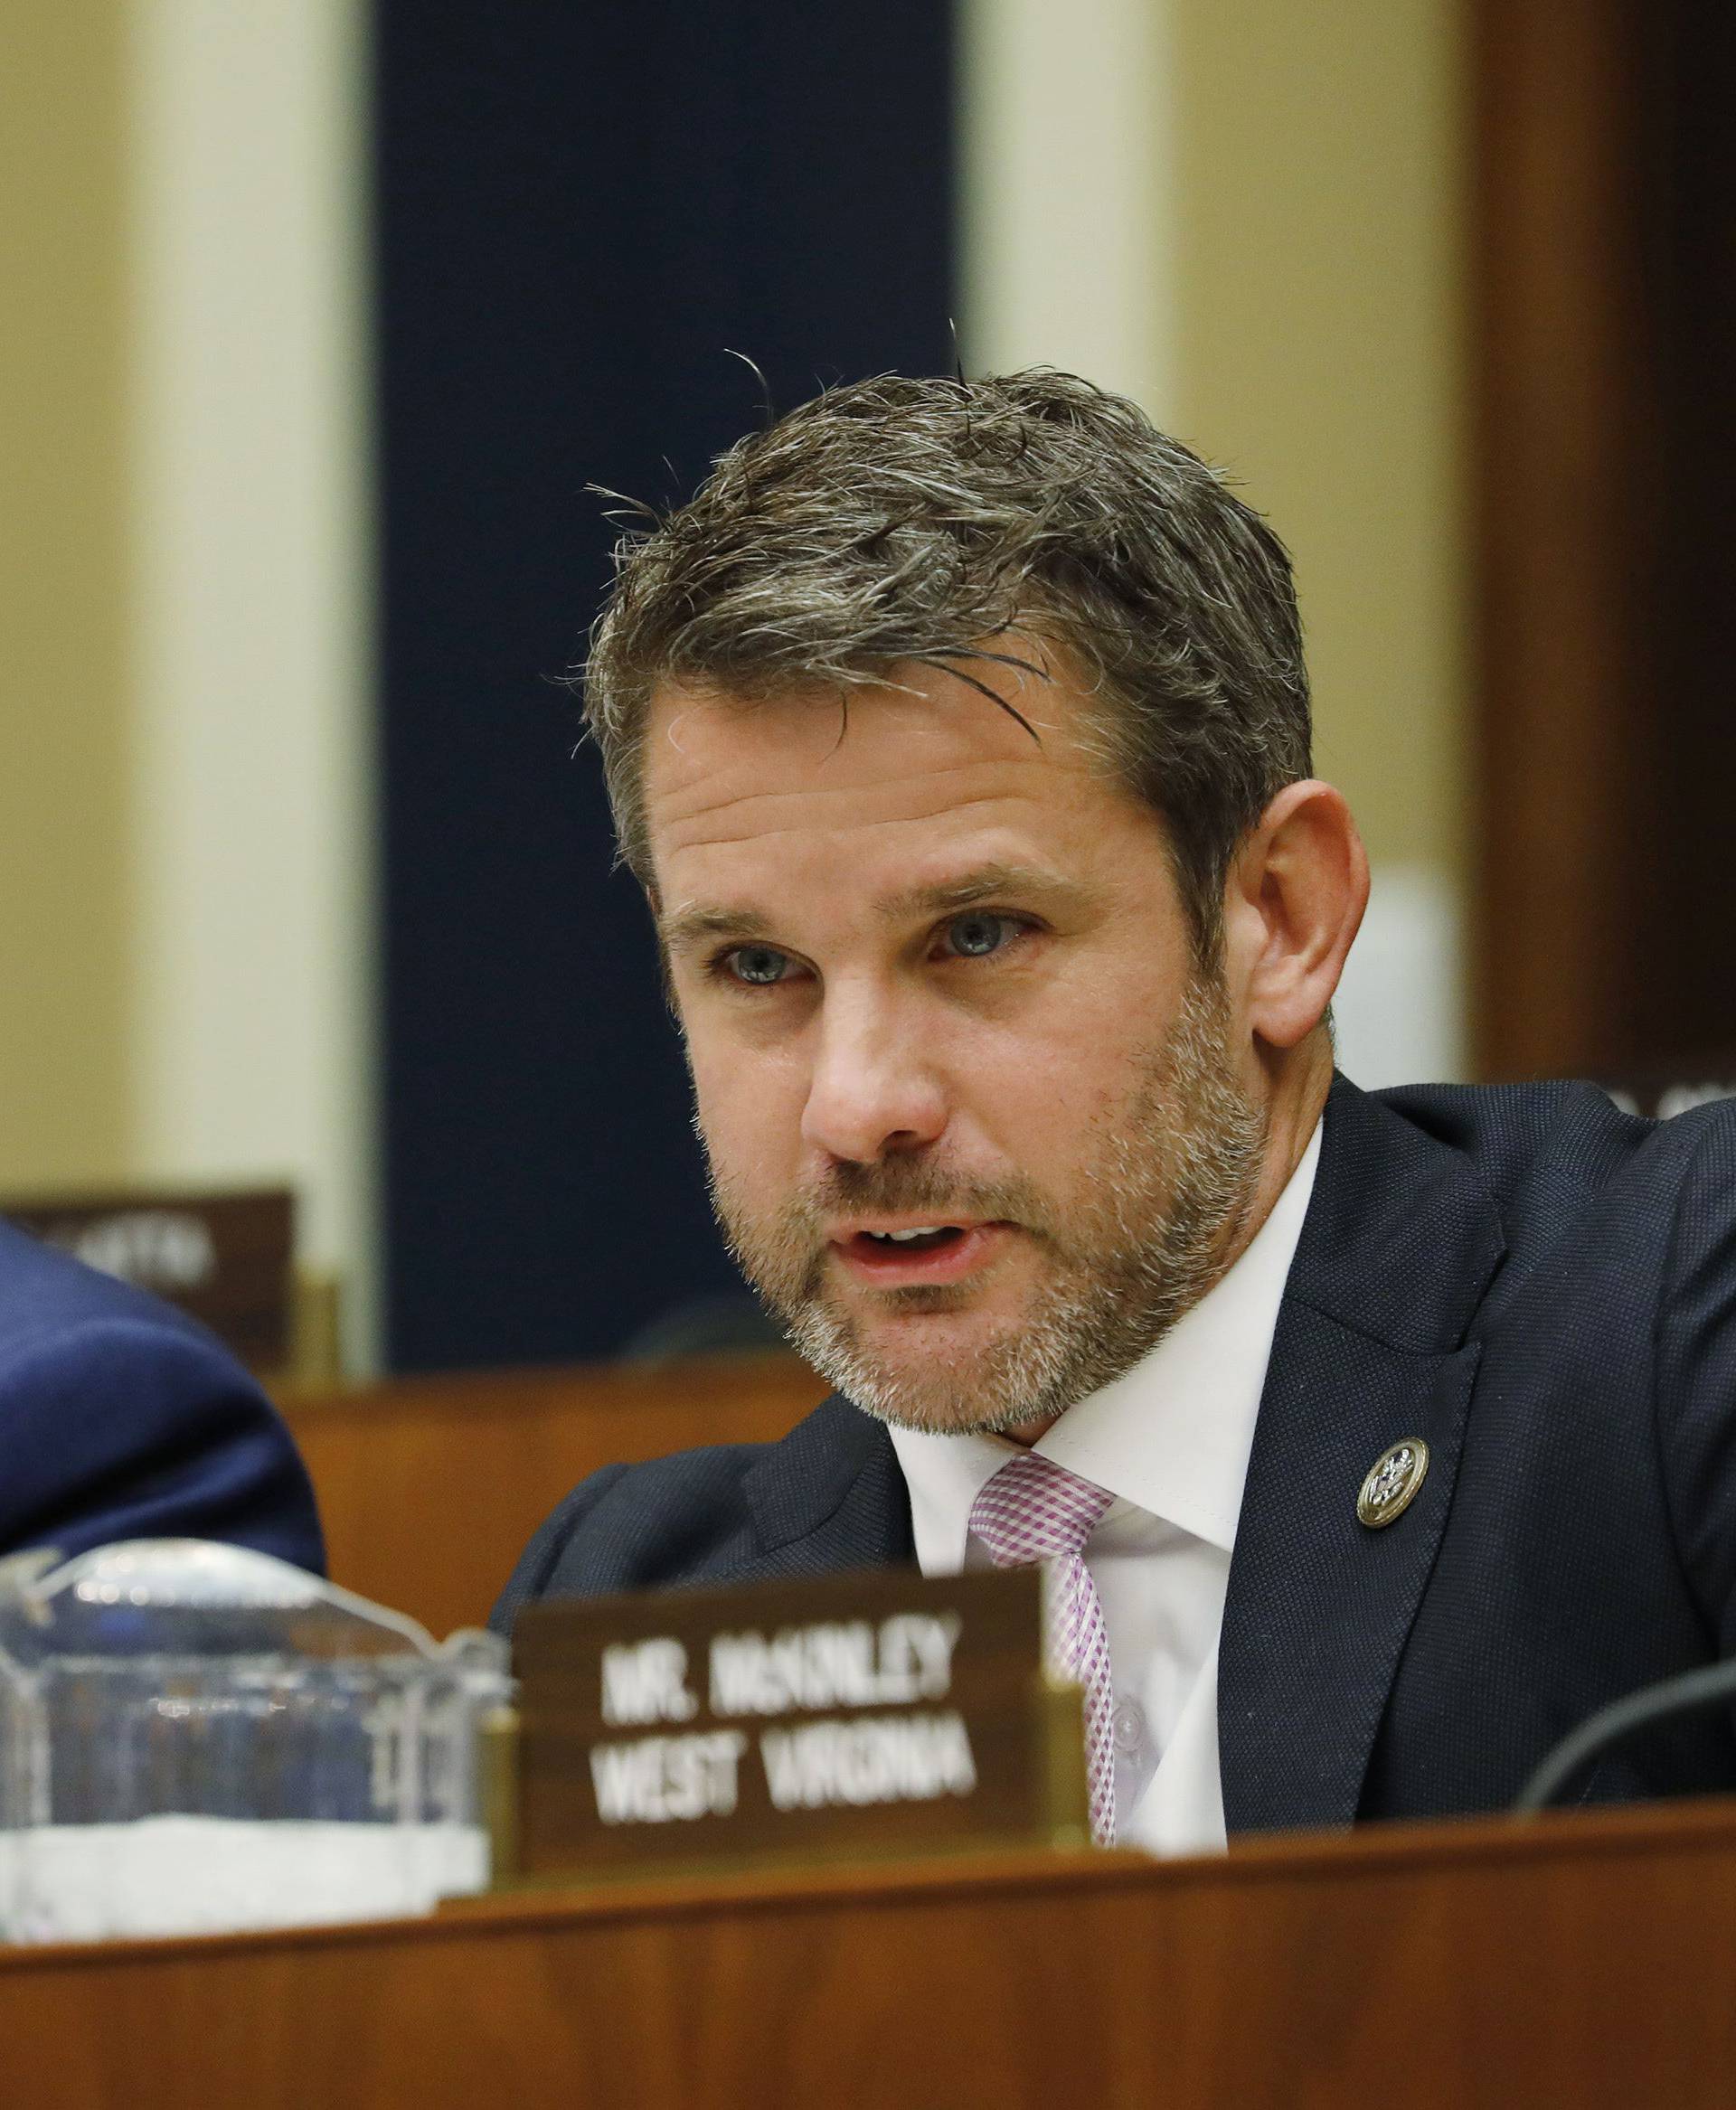 Rep. Kinzinger holds up his phone displaying a fake Facebook profile as Facebook CEO Zuckerberg testifies before the House Energy and Commerce Committee on Capitol Hill in Washington